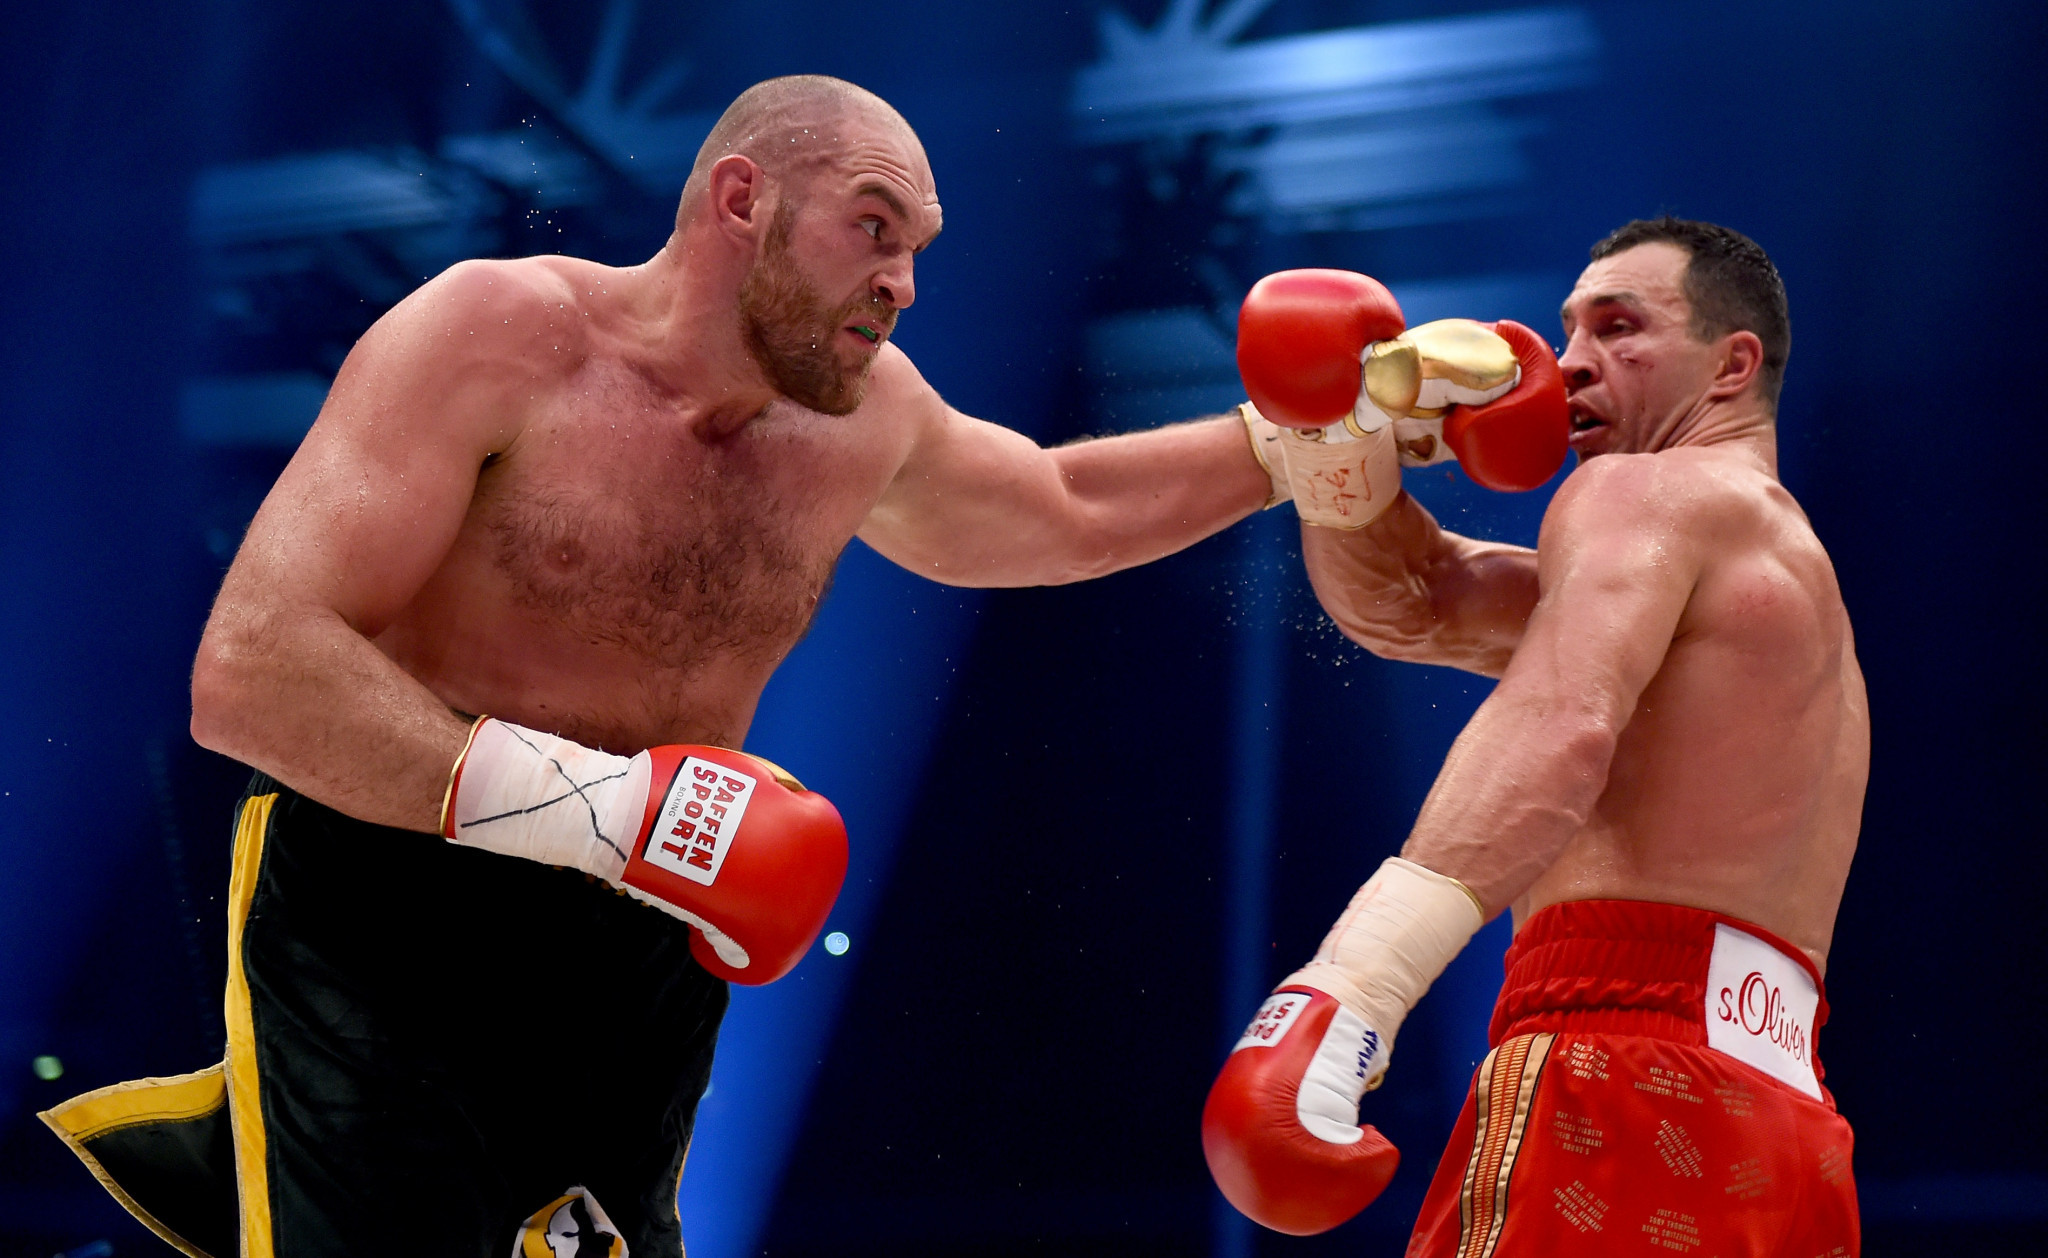 Tyson Fury, left, beat Wladimir Klitschko, right, to claim the world heavyweight title in November 2015, despite having tested positive for nandrolone nine months earlier ©Getty Images